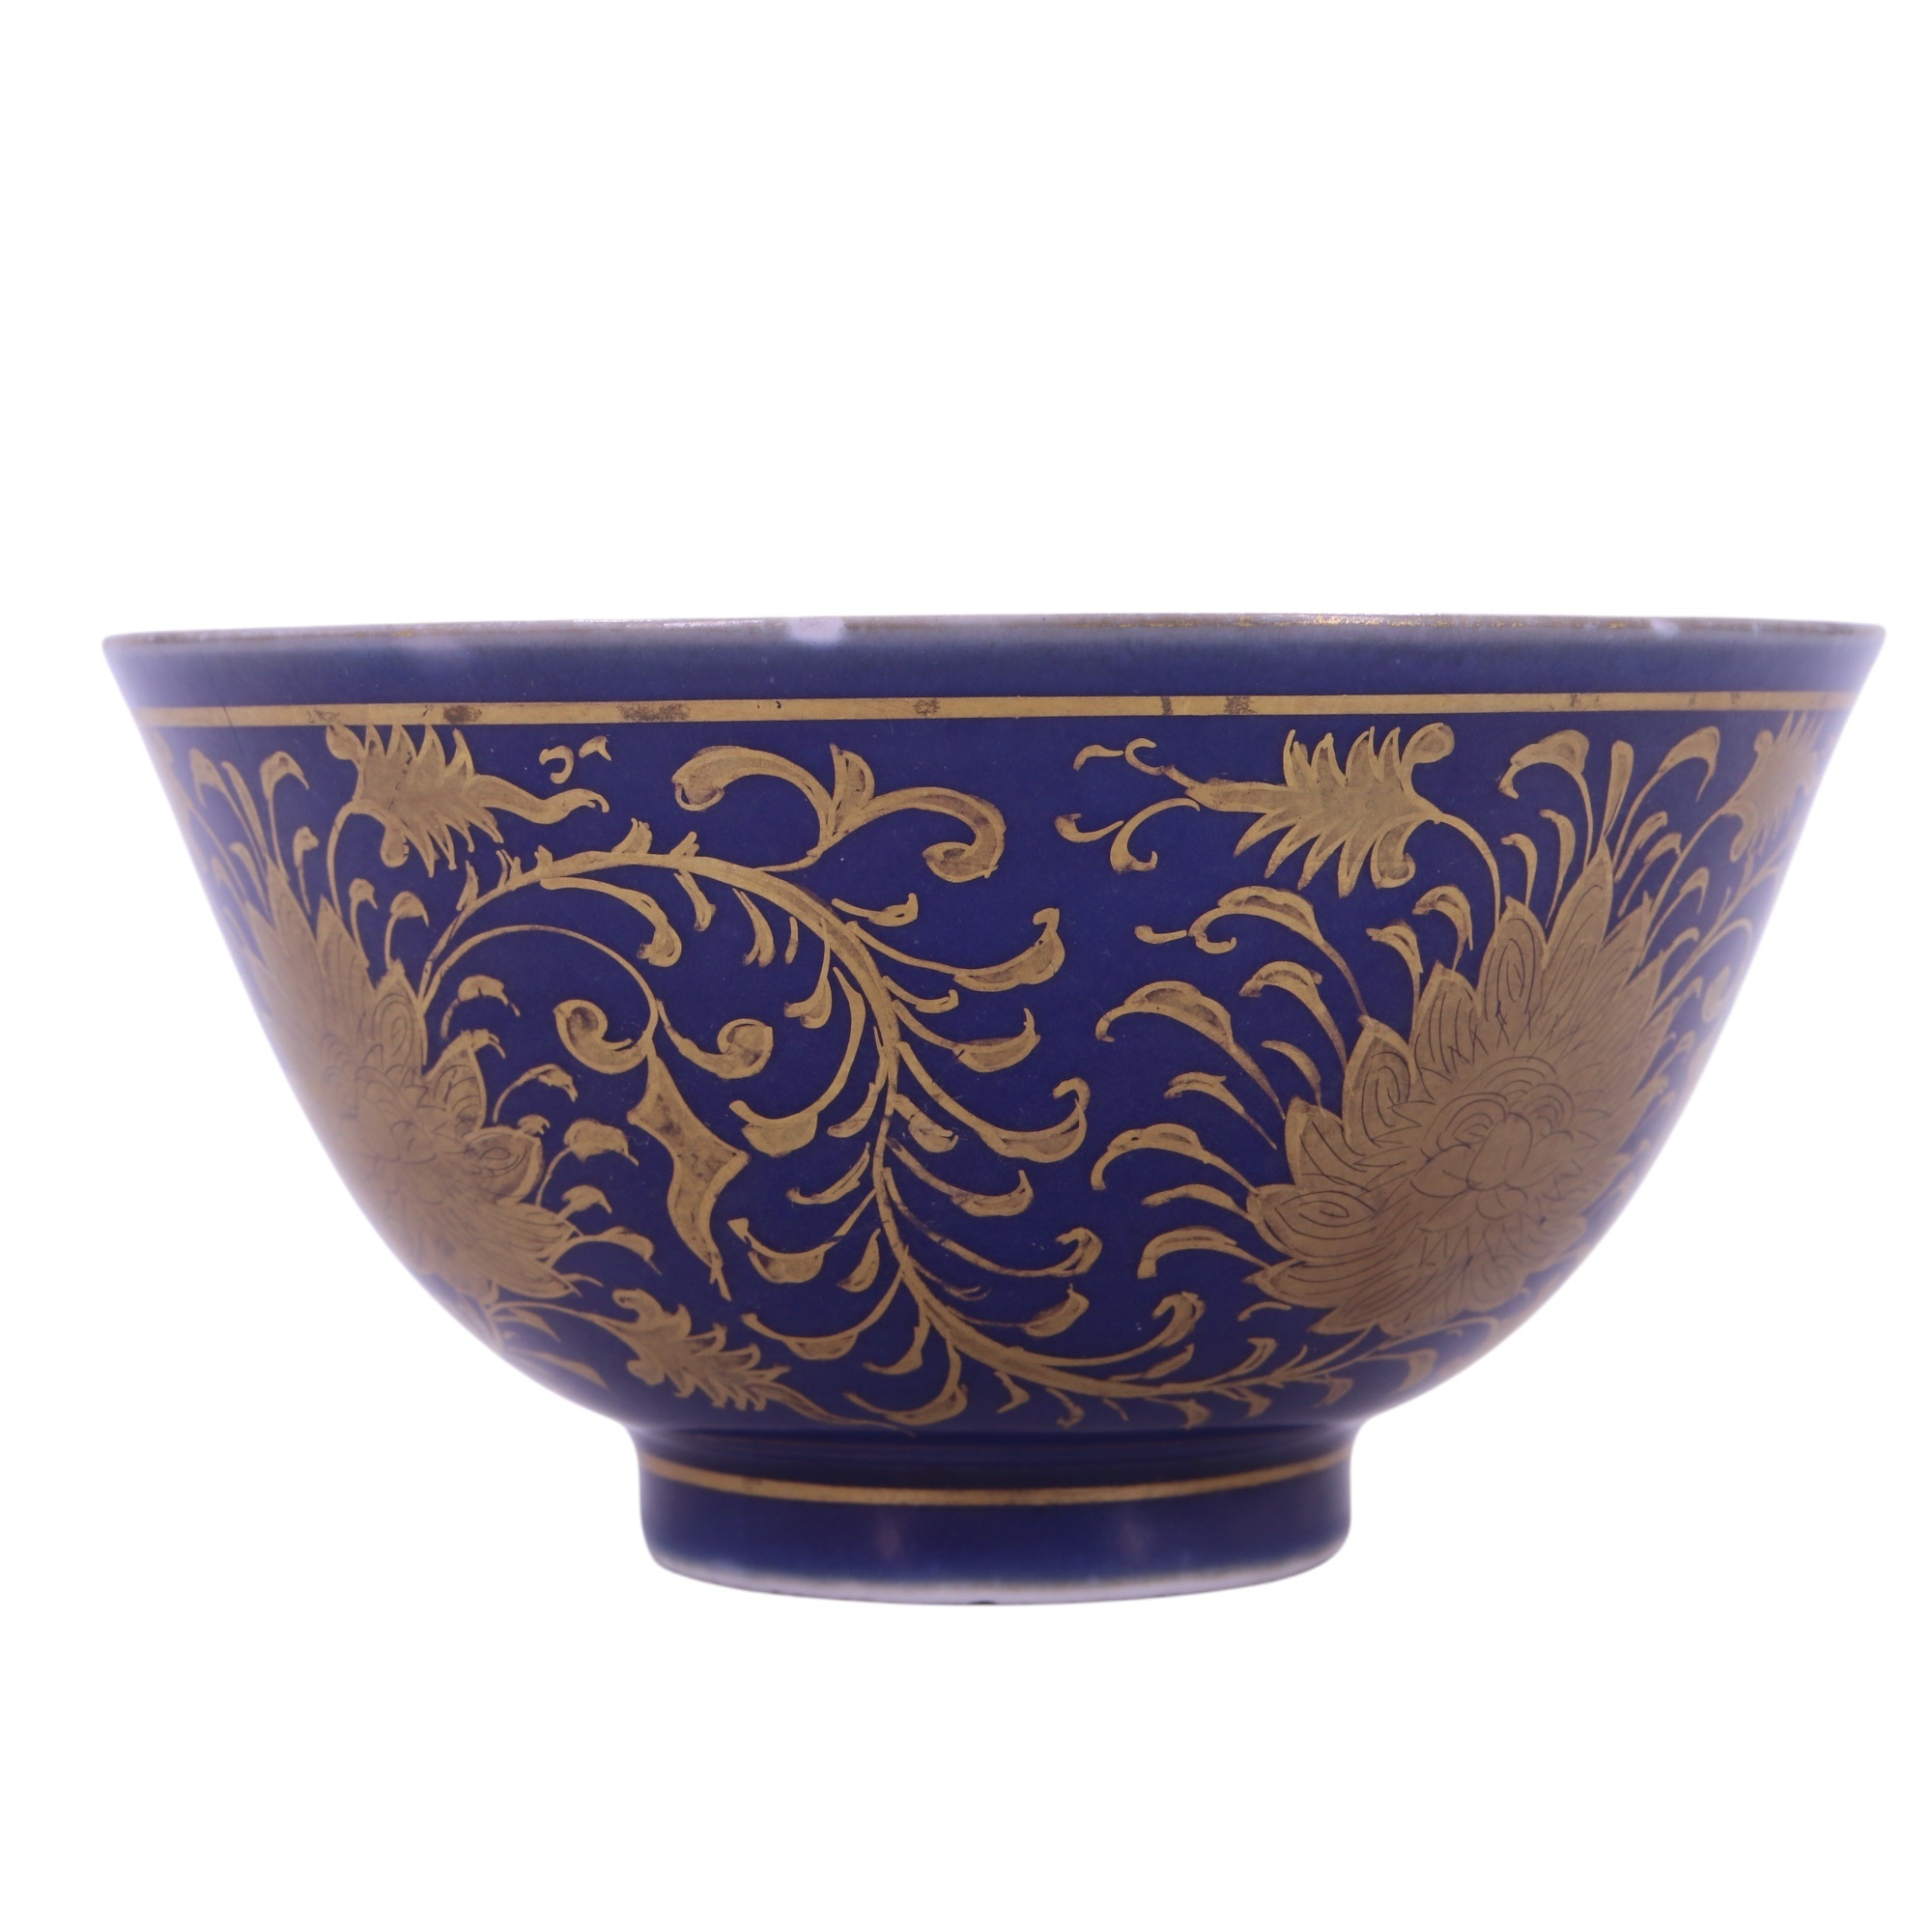 A Chinese powder-blue glazed and gilt porcelain bowl the interior depicting a Longma reserved in a - Image 4 of 6